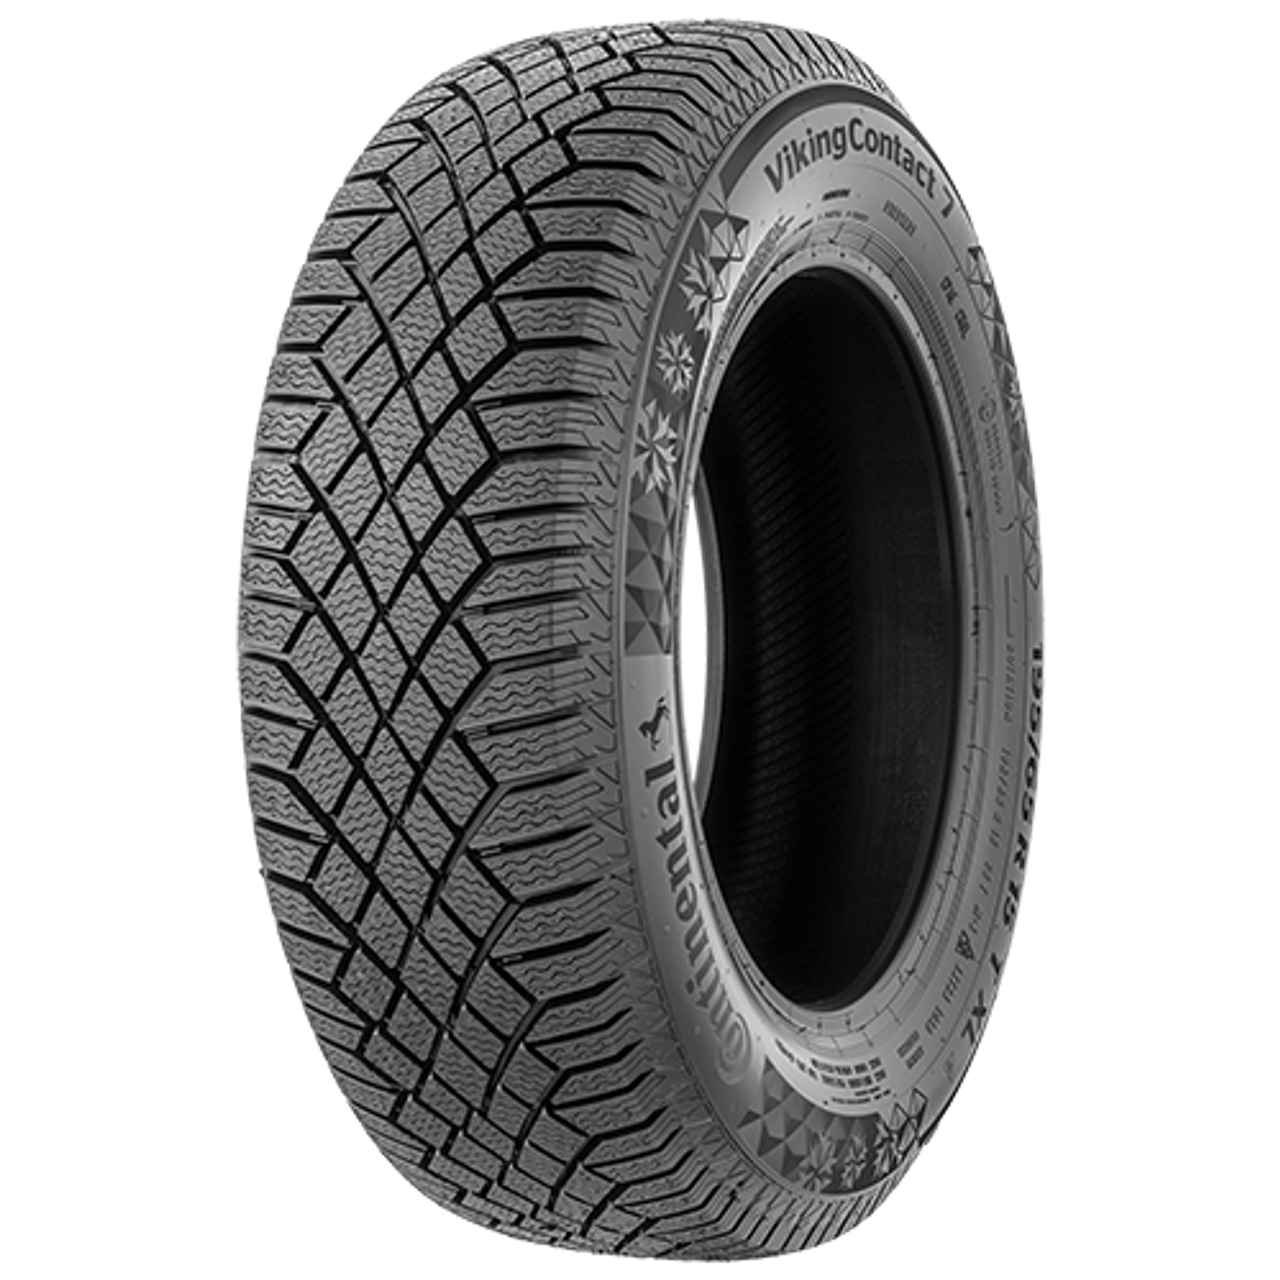 CONTINENTAL VIKINGCONTACT 7 195/60R16 93T NORDIC COMPOUND BSW